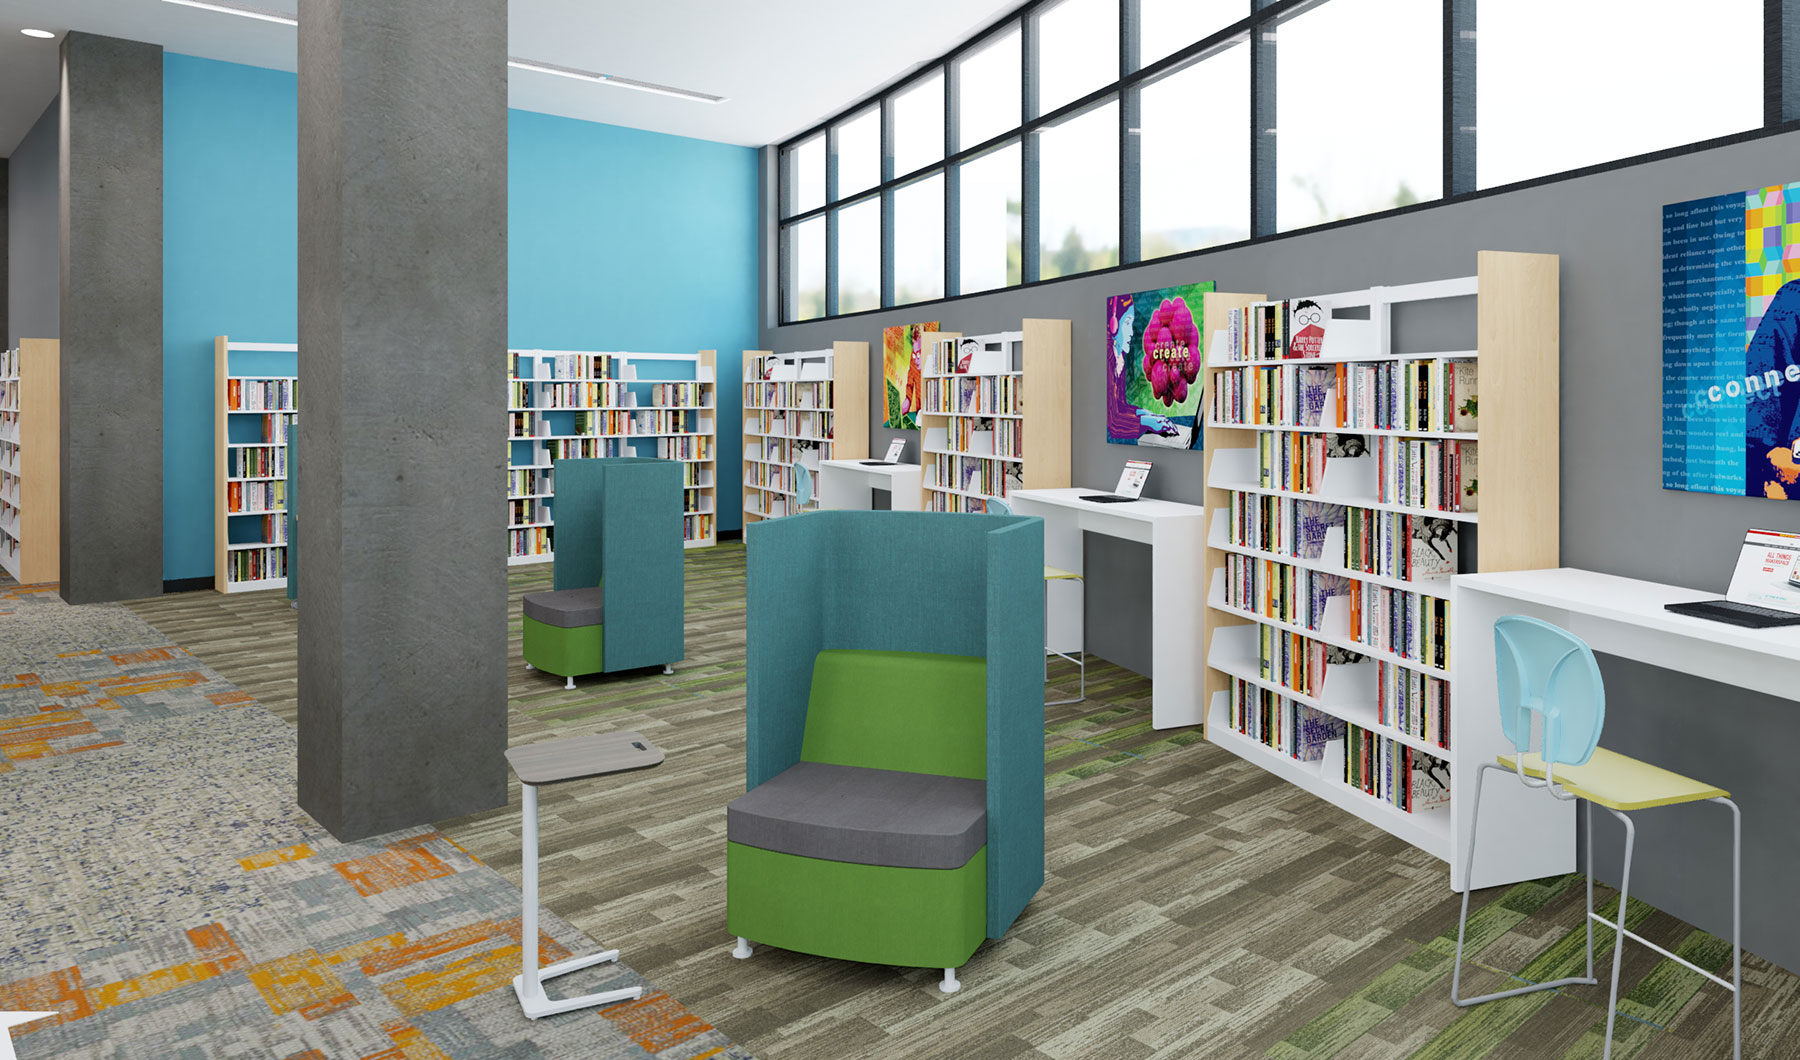 Public Library Designed for Social Distancing